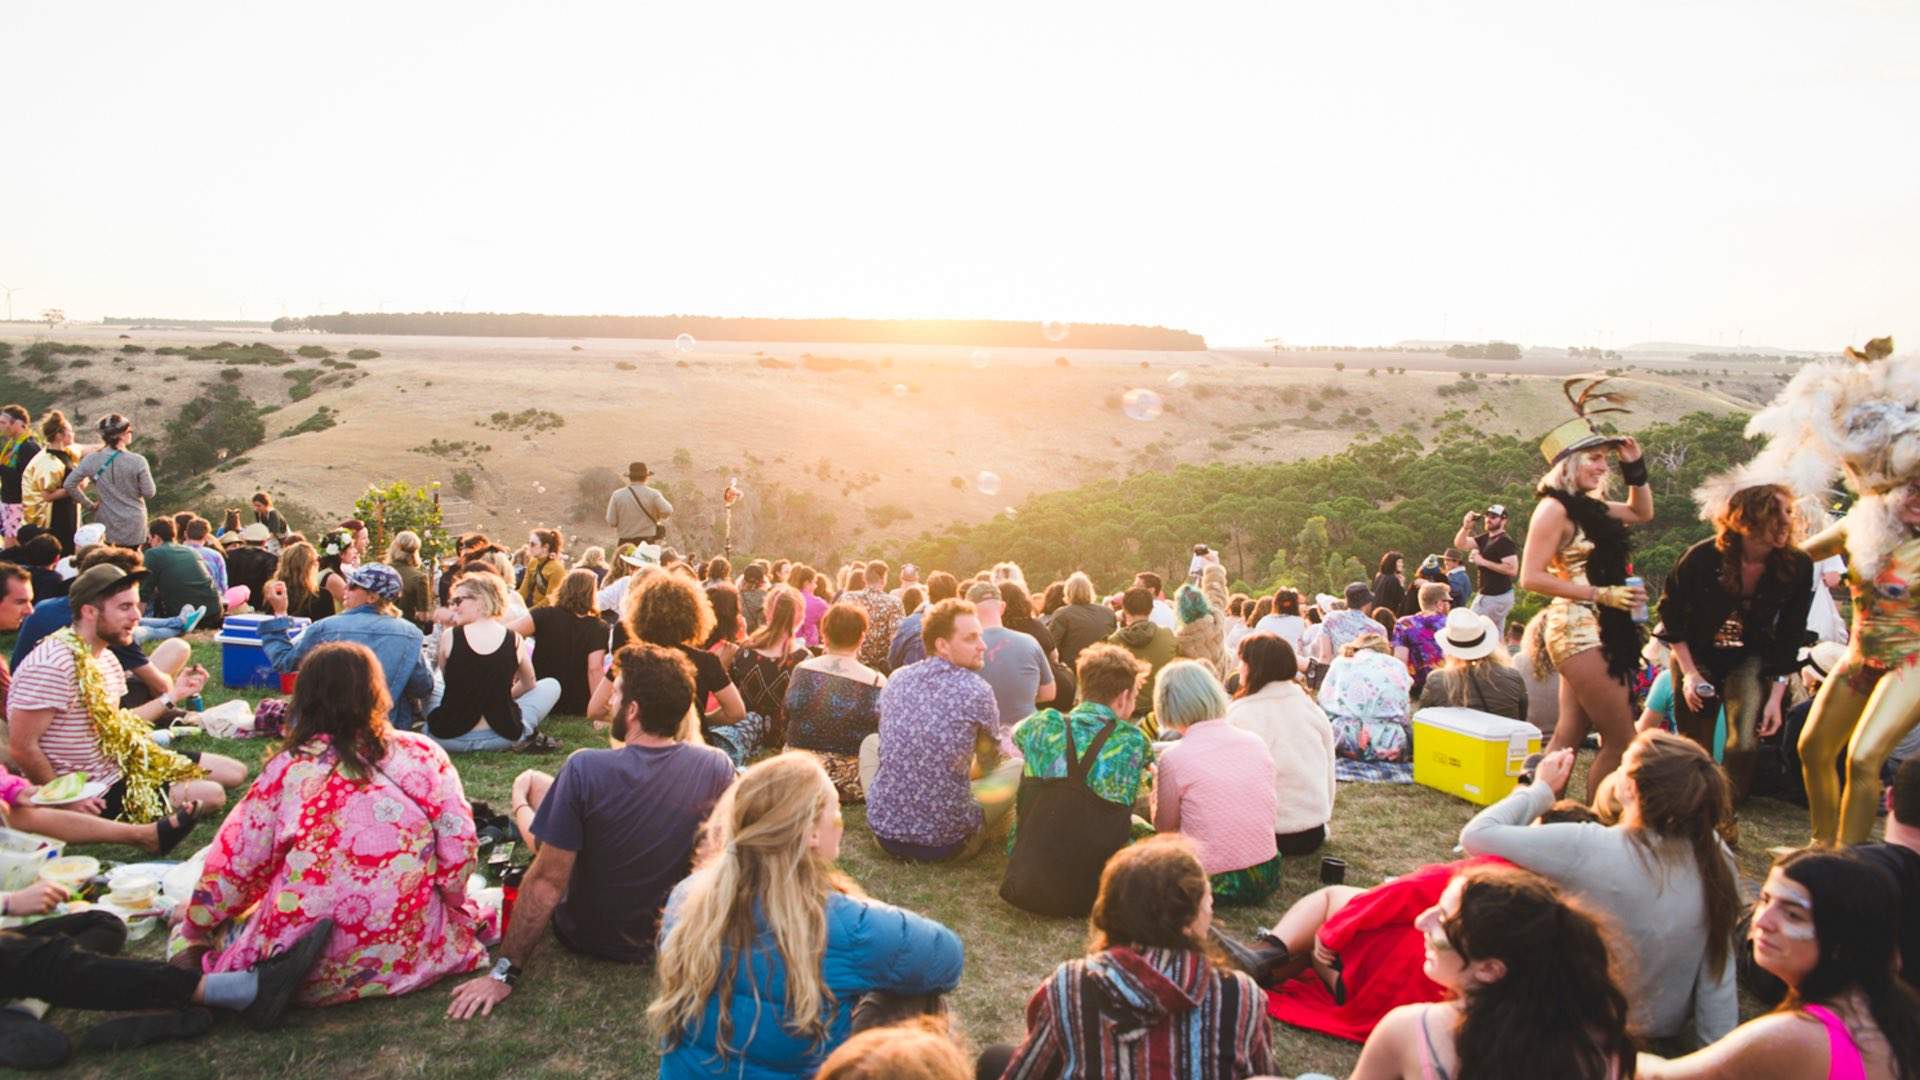 Start Making March Plans: Golden Plains Is Returning for 2023 and the Ballot Is Now Open